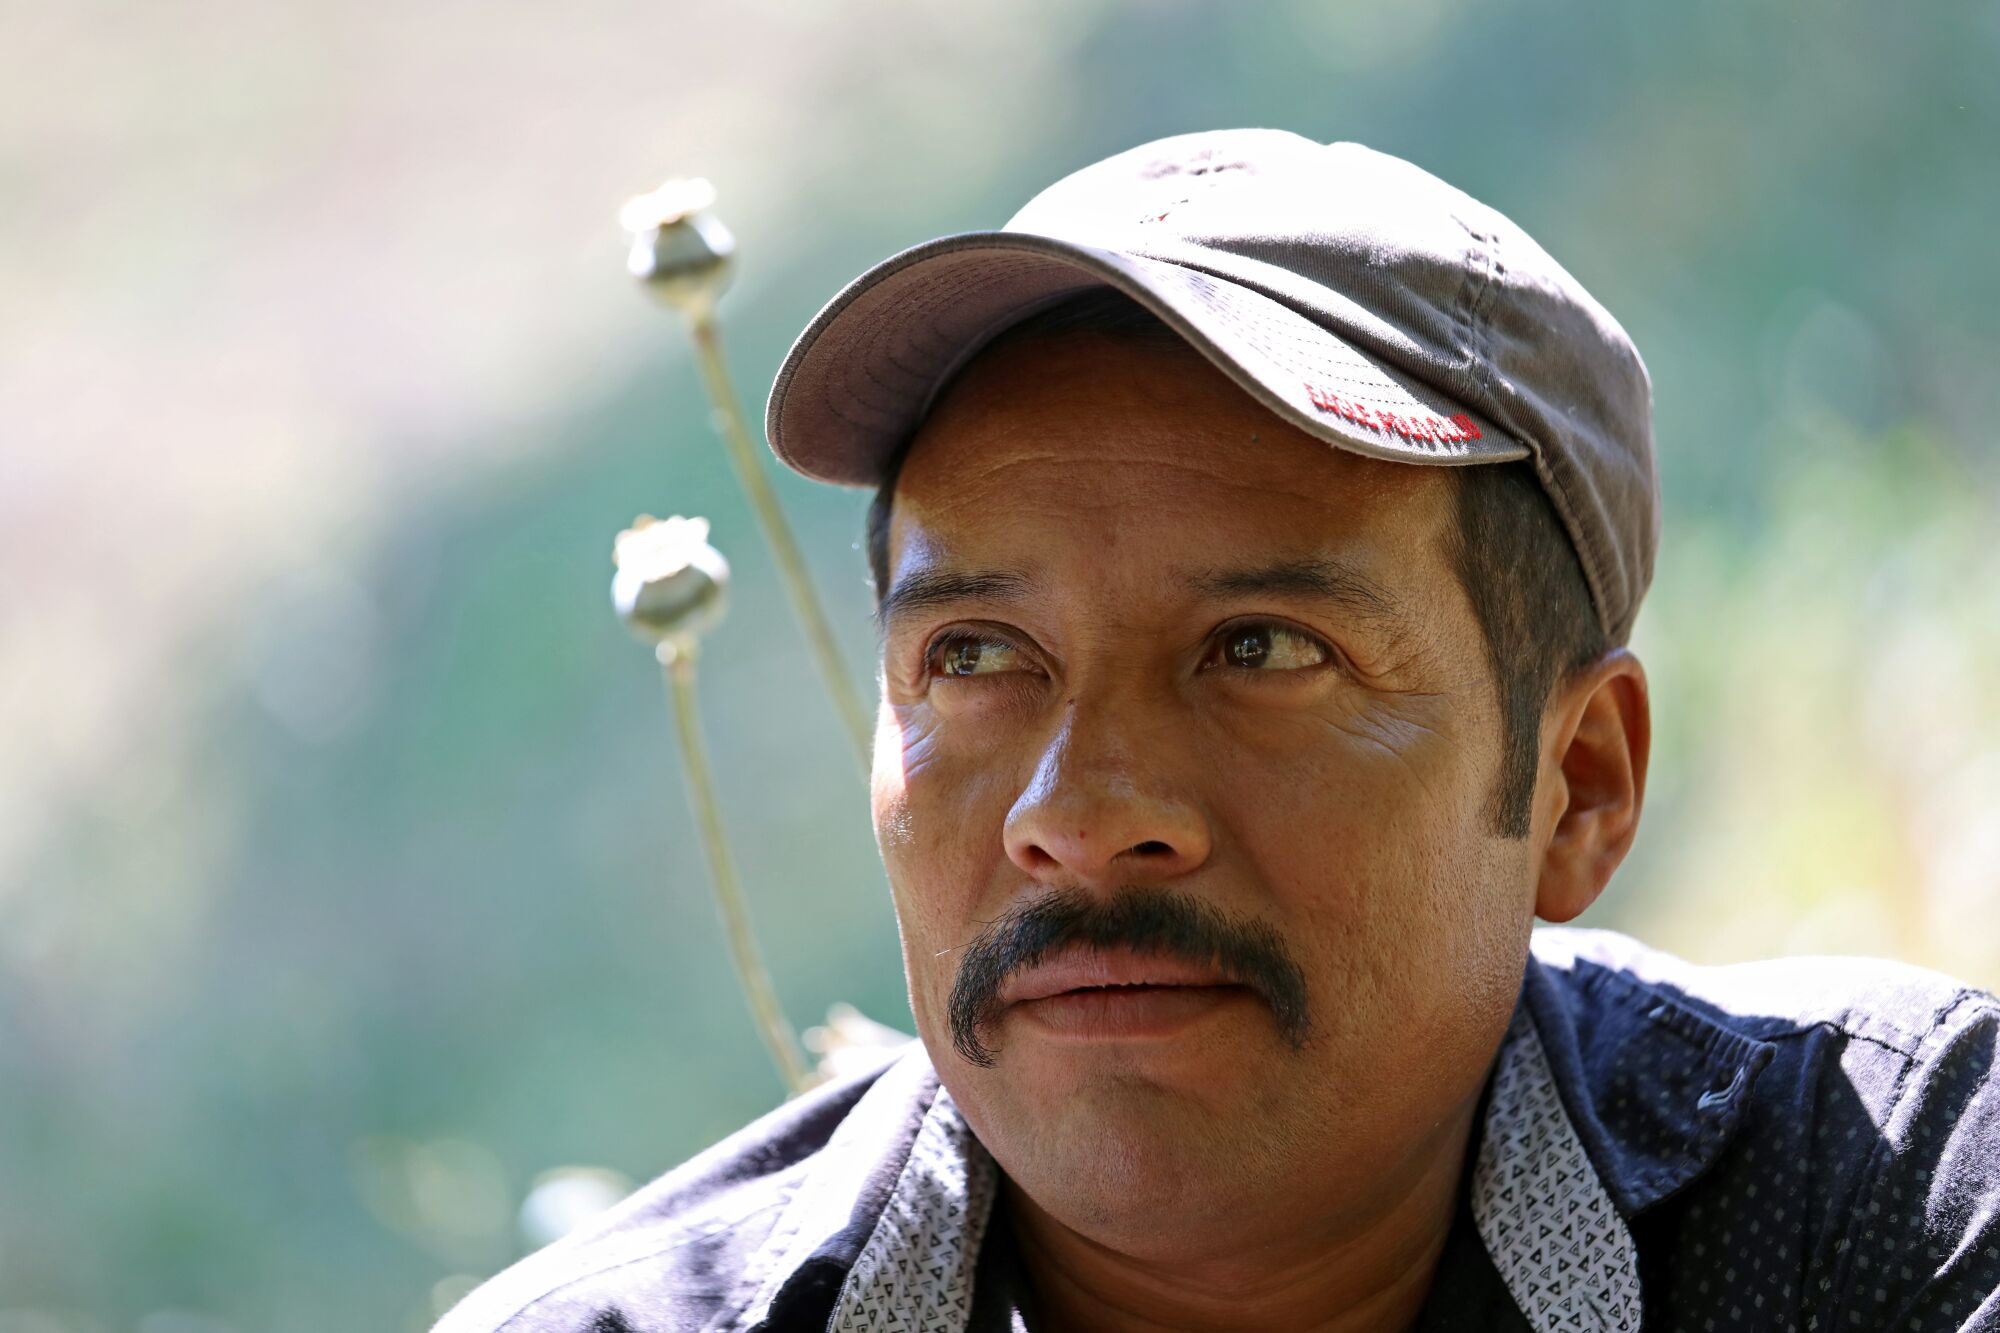 Pacheco, a father of five children, four of whom are in the U.S., can no longer make a living farming poppy plants. Demand dropped due to synthetics.